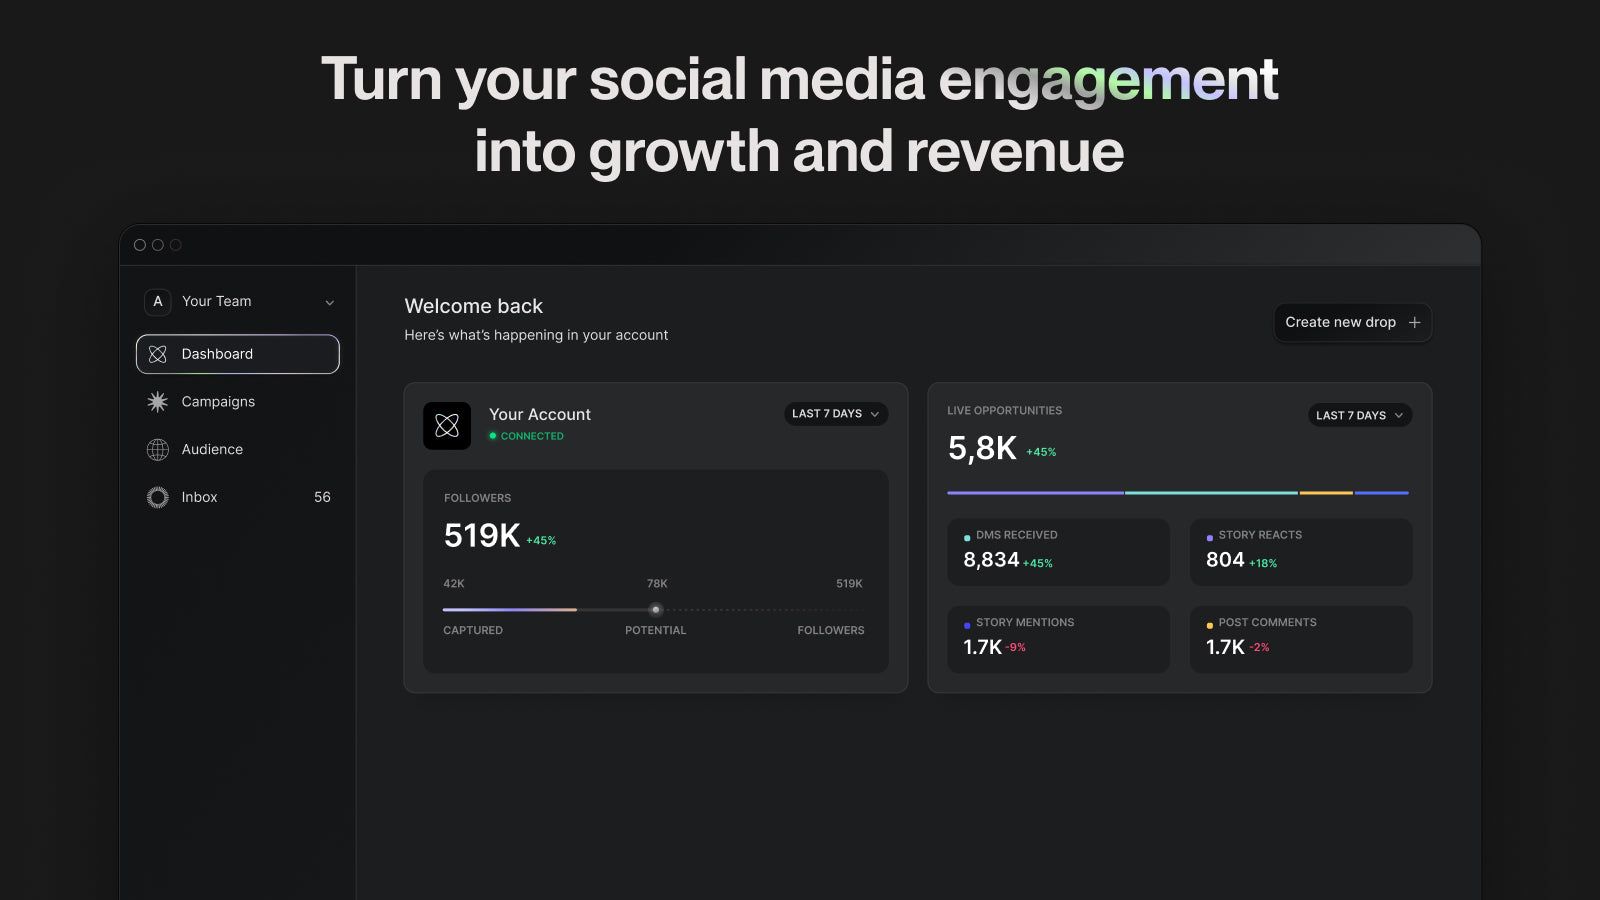 Turn your social media engagement into growth